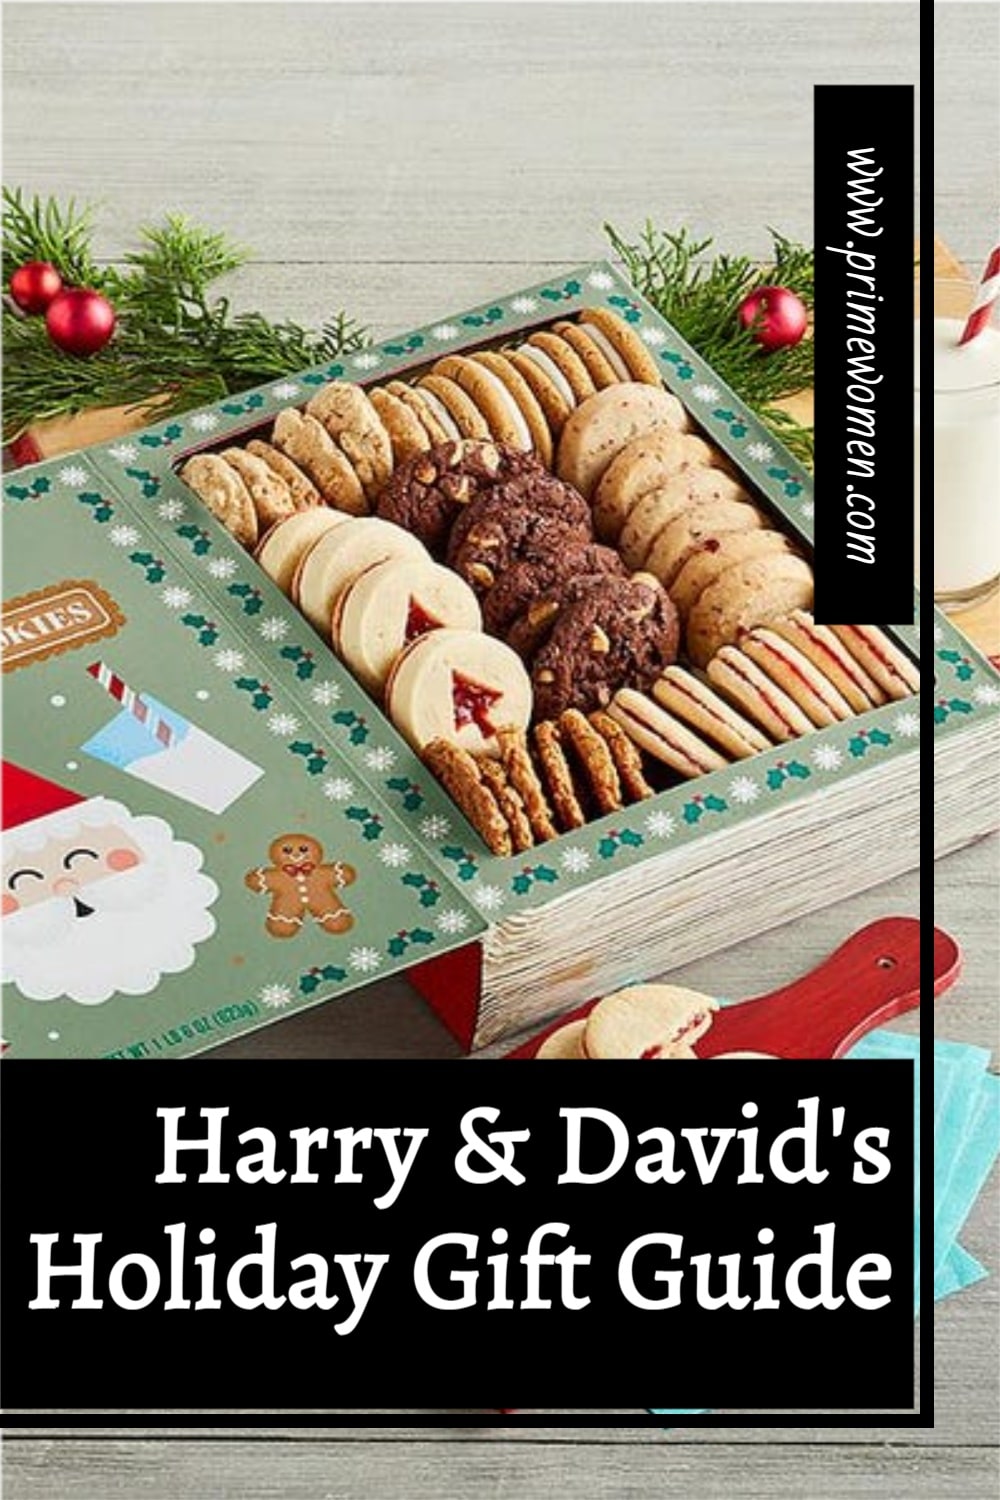 Harry & David's Holiday Gift Guide